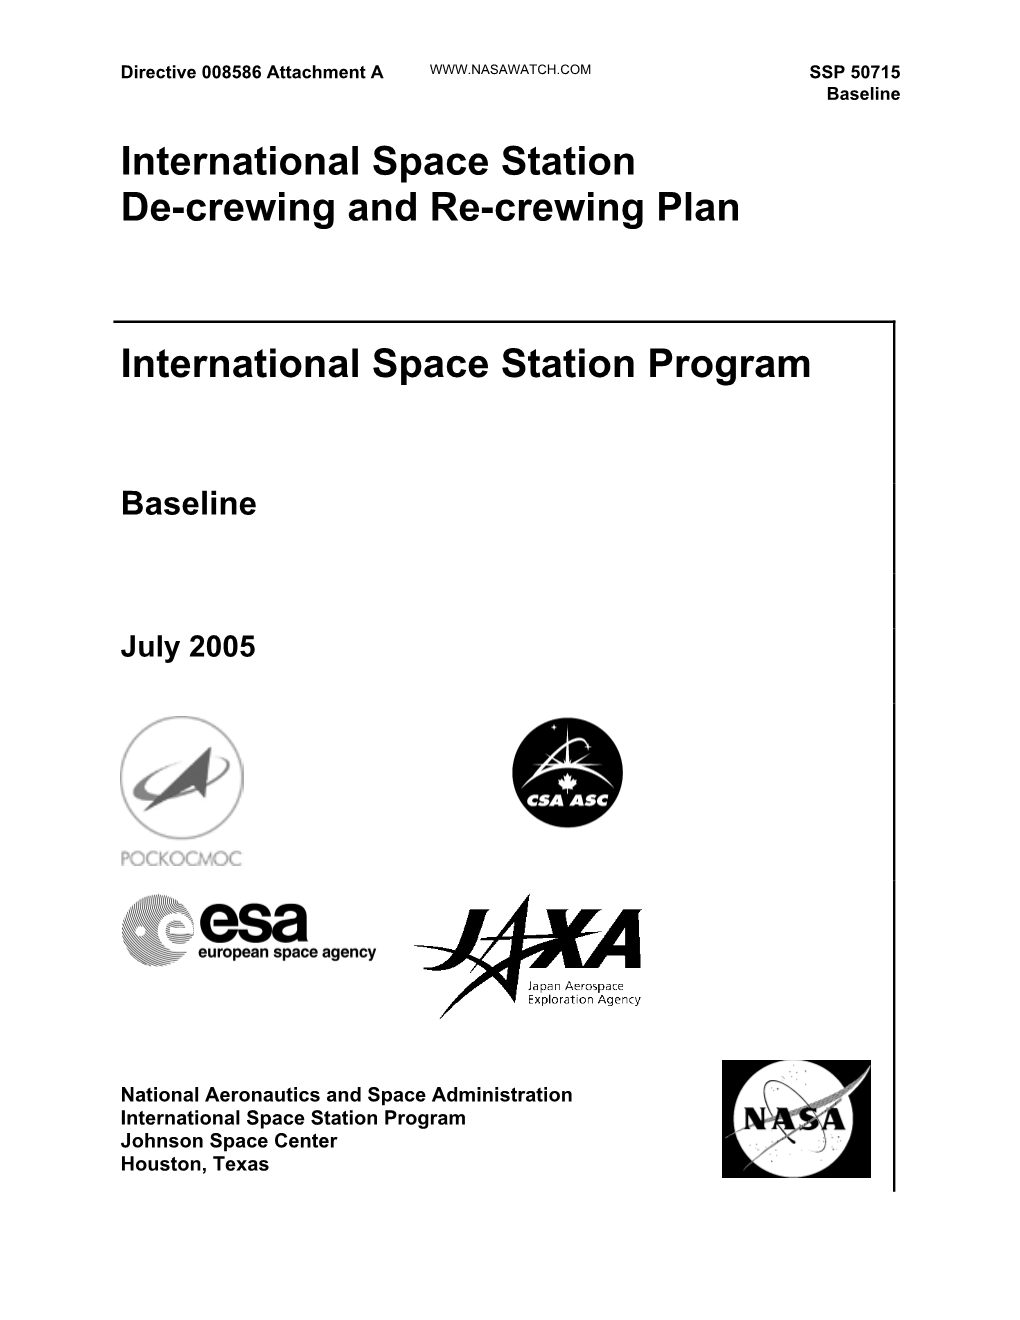 International Space Station De-Crewing and Re-Crewing Plan